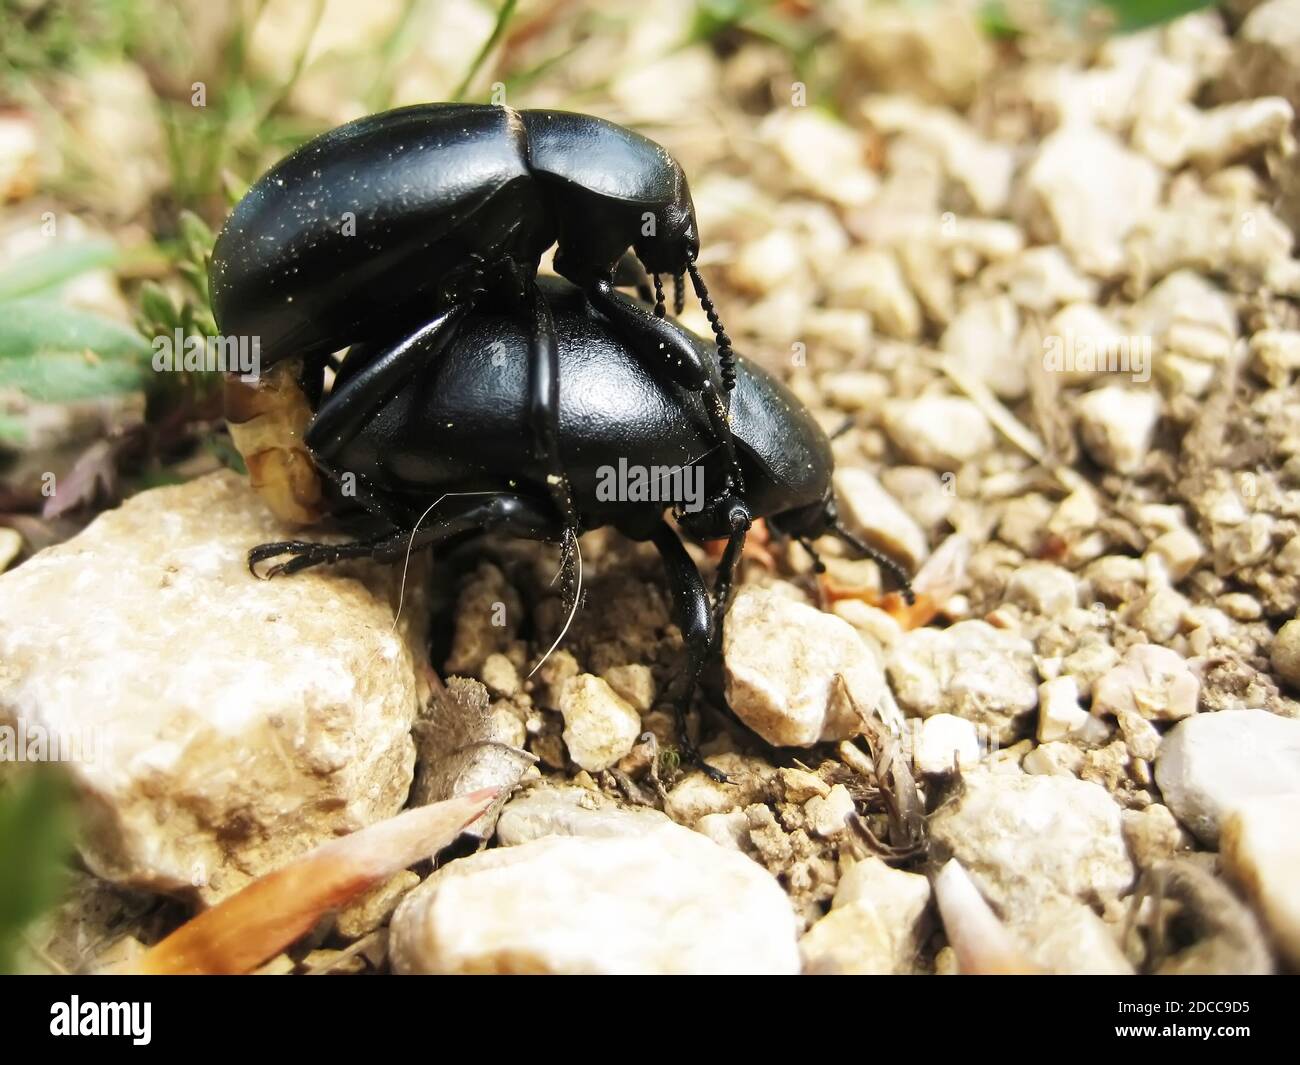 Mating of two white Earth-boring dung beetles (Geotrupidae) Stock Photo